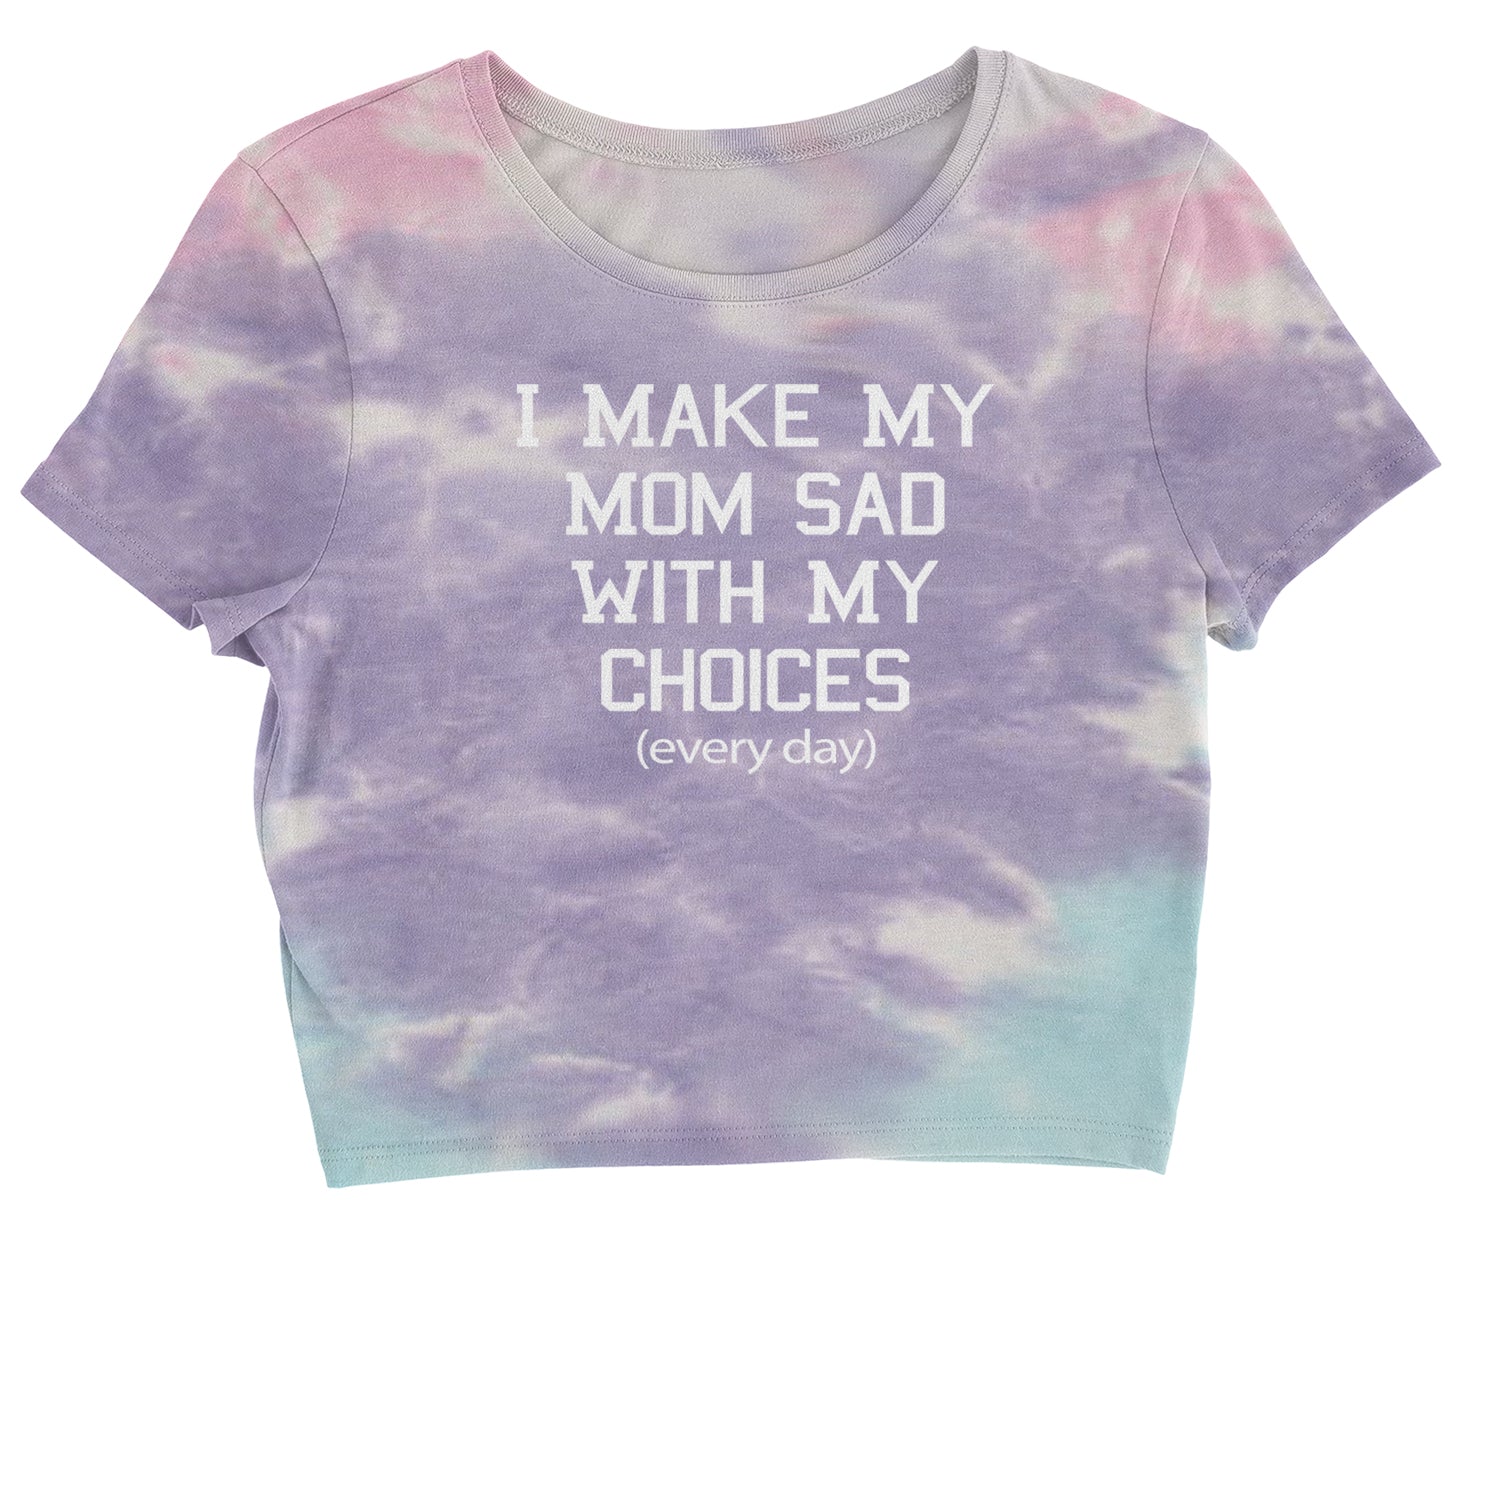 I Make My Mom Sad With My Choices Every Day Cropped T-Shirt funny, ironic, meme by Expression Tees